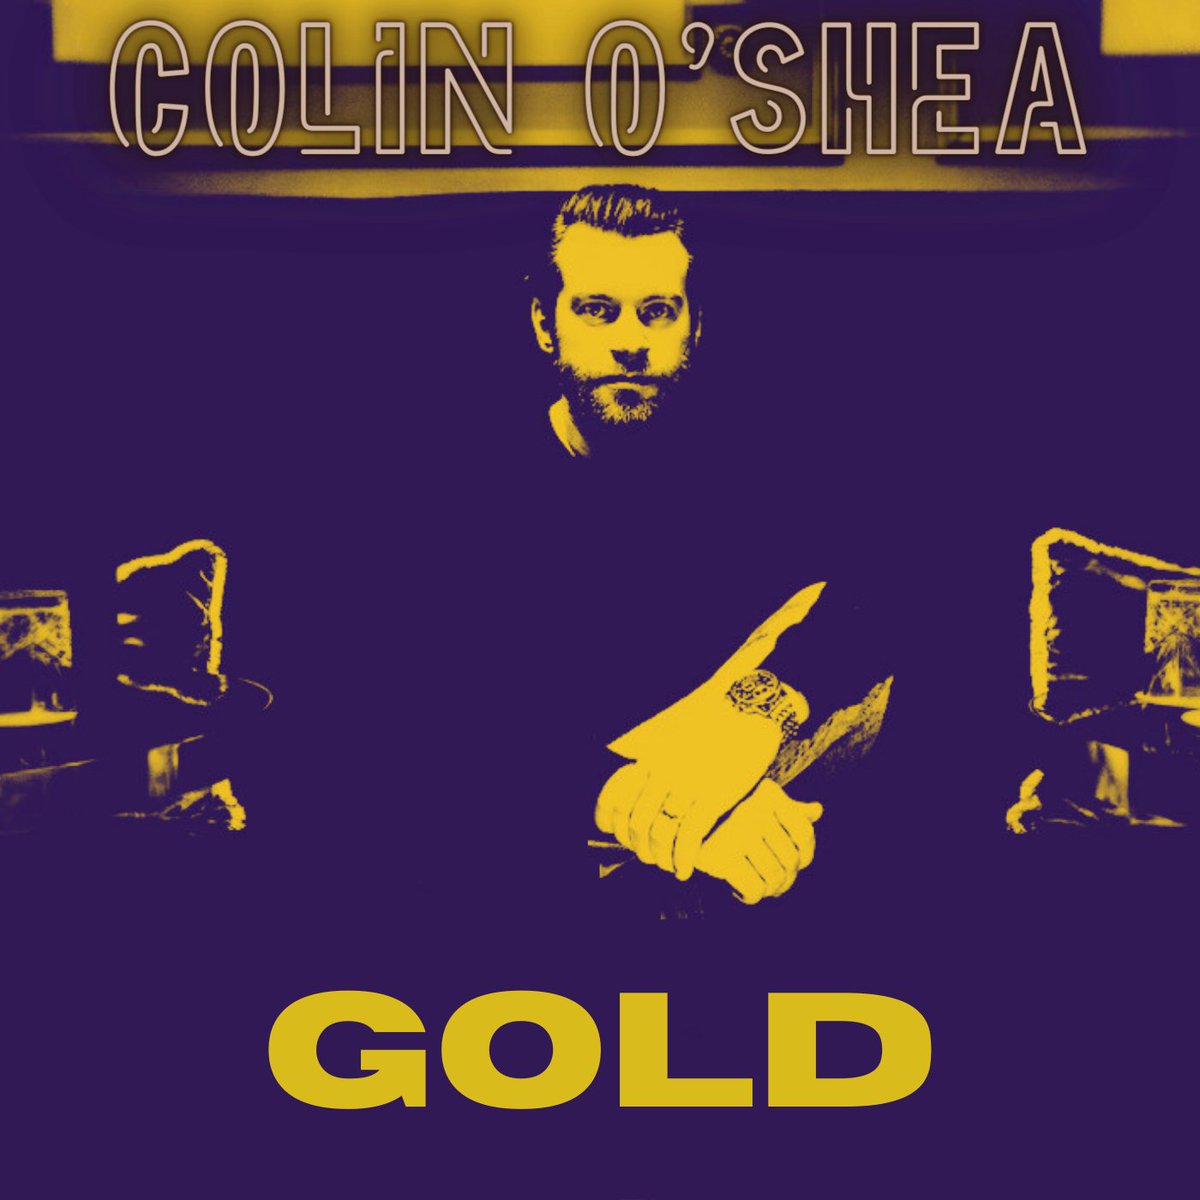 New single 'Gold' is OUT TODAY - check it out on @spotify, @youtube @applemusic @amazonmusic or wherever you get your music  🌞 🎶 

#gold #irishbeats #newirishmusic #playirish #selectirish #newirishmusic #newmusicfriday #irishradio